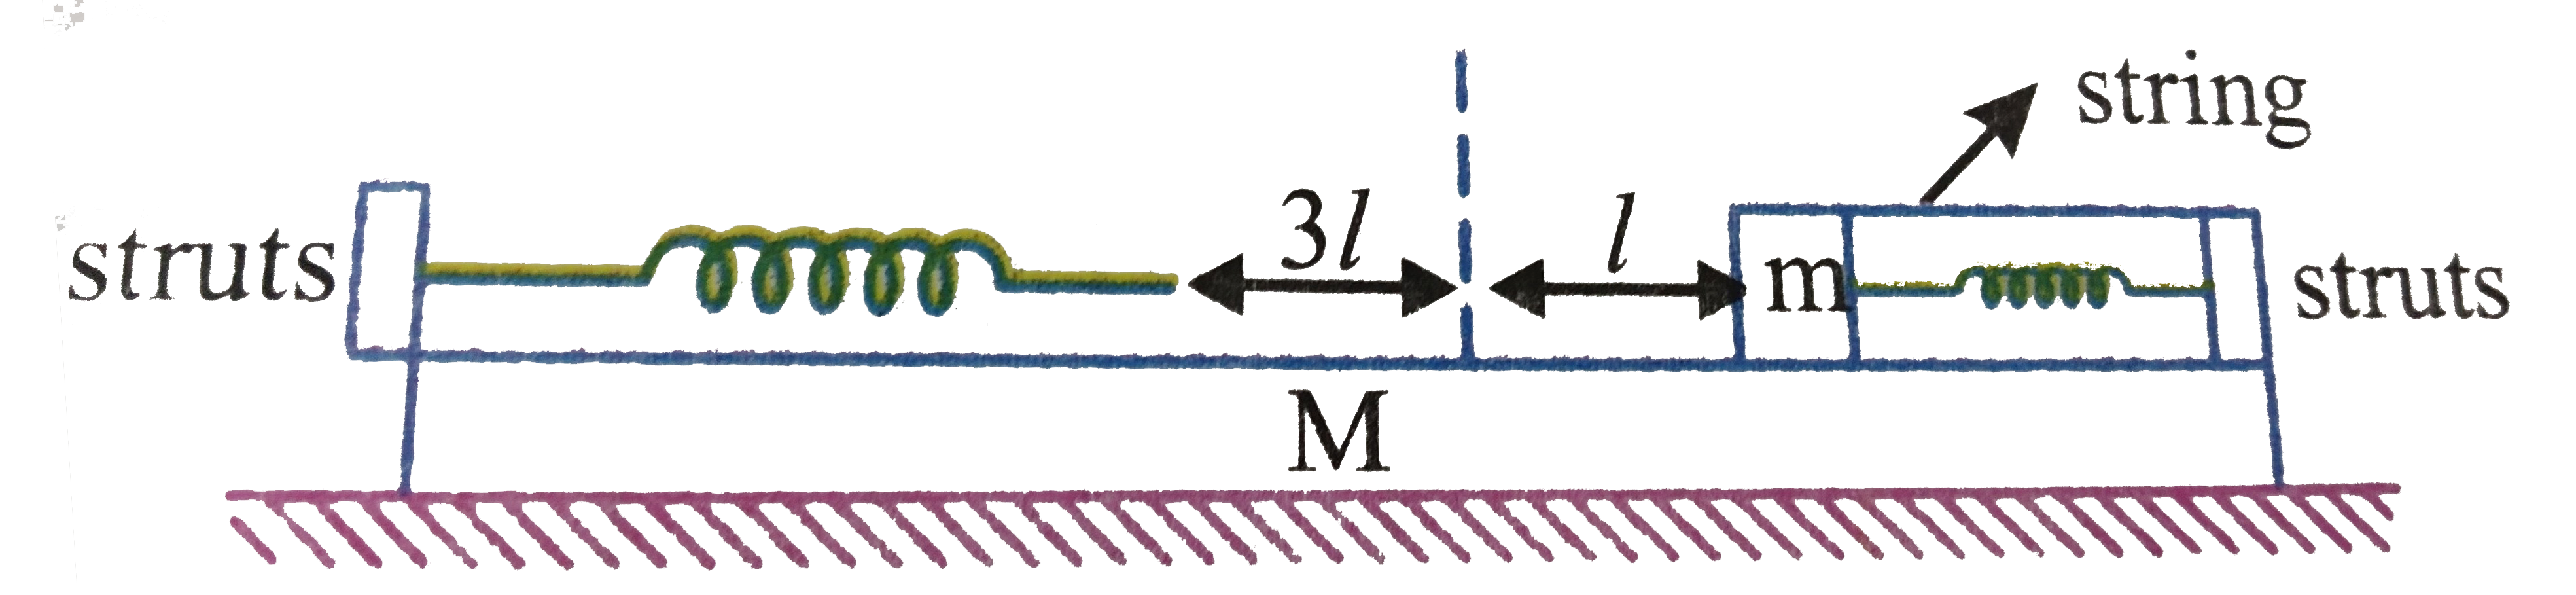 A plank of mass M is placed on a smooth hroizonal surface. Two light identical springs each of stiffness k are rigidly connected to structs at the ends of the plank as shown. When the spring are in their unextended position the distance between their free ends is 3l. a block of mass m is placed on the plank and pressed aganist one of the springs so that it is compressed by l. To keep the blocks at rest it is connected to the strut by means of a light string, initially the syetem is at rest. Now the string is burnt.      Time period of oscillation of block: